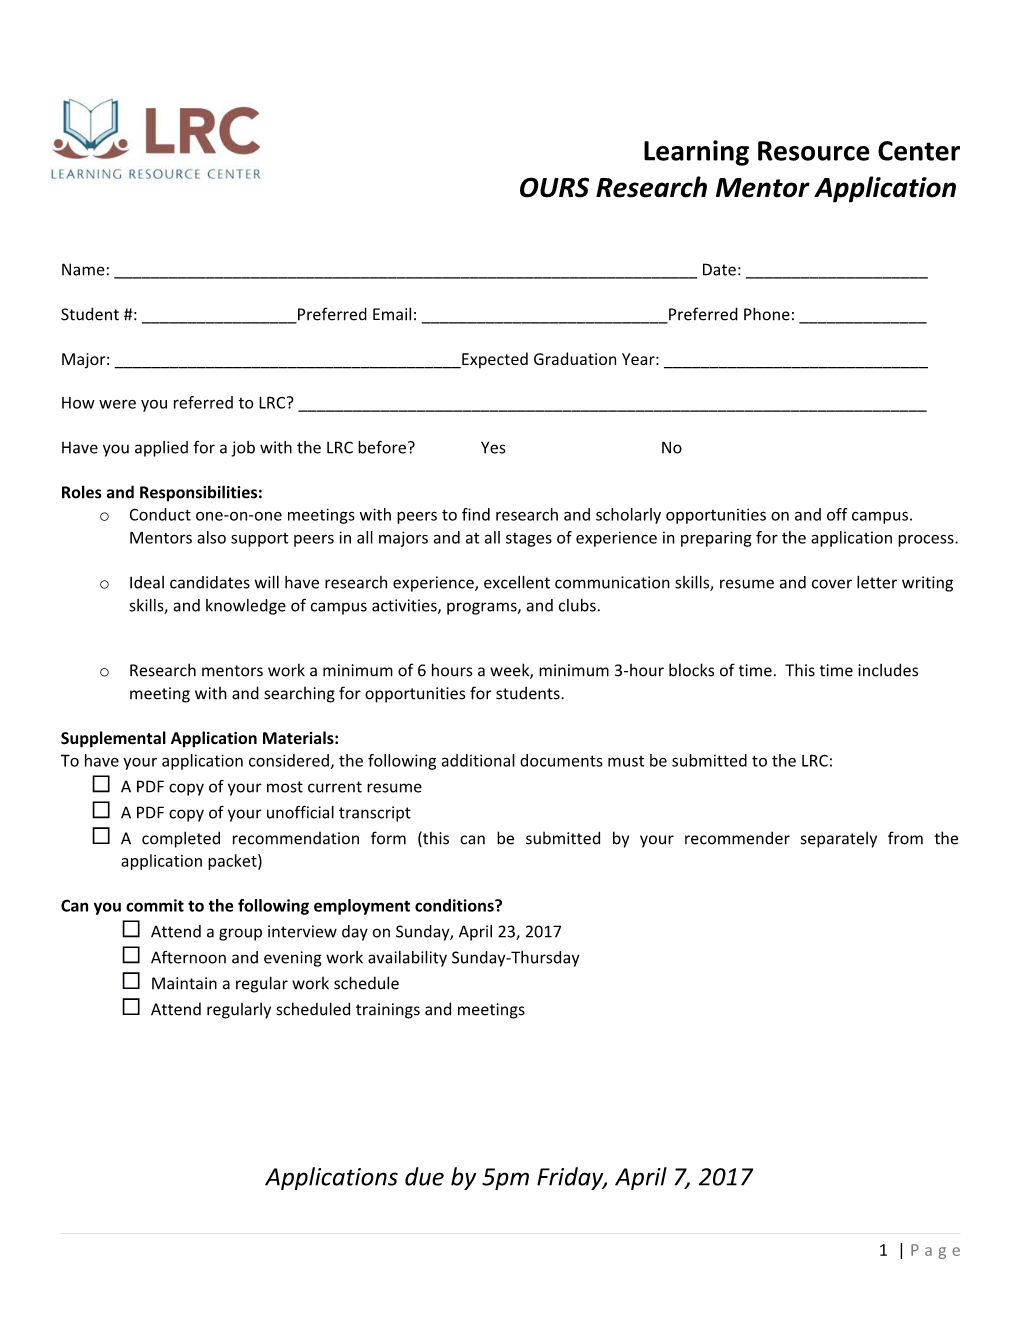 OURS Research Mentor Application